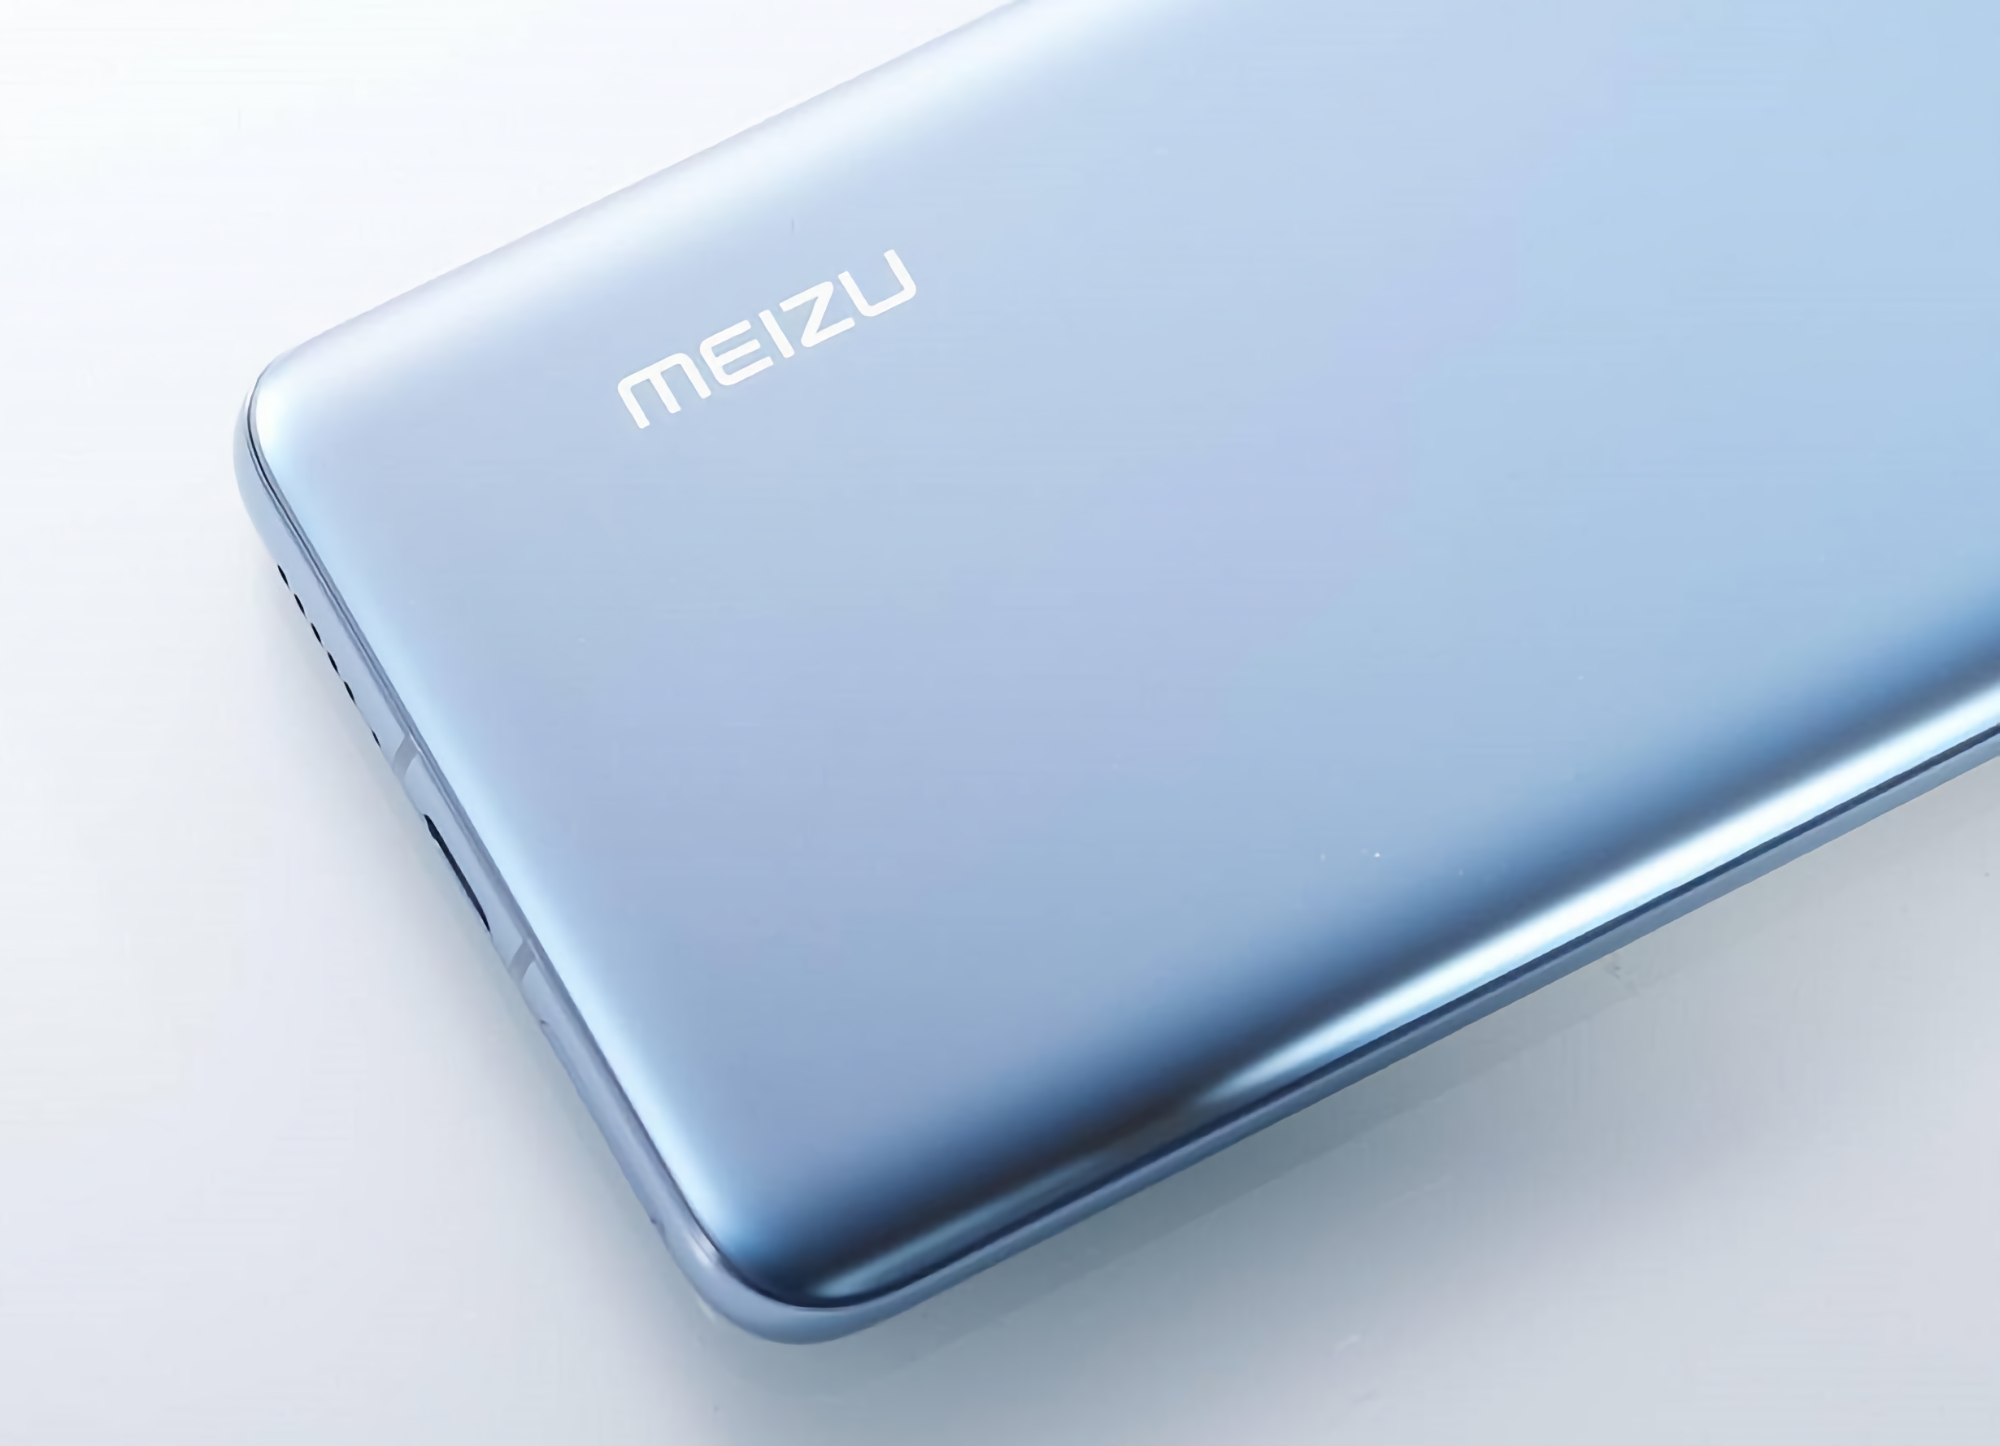 After three years of silence: Meizu plans to introduce a budget smartphone under the Blue Charm brand